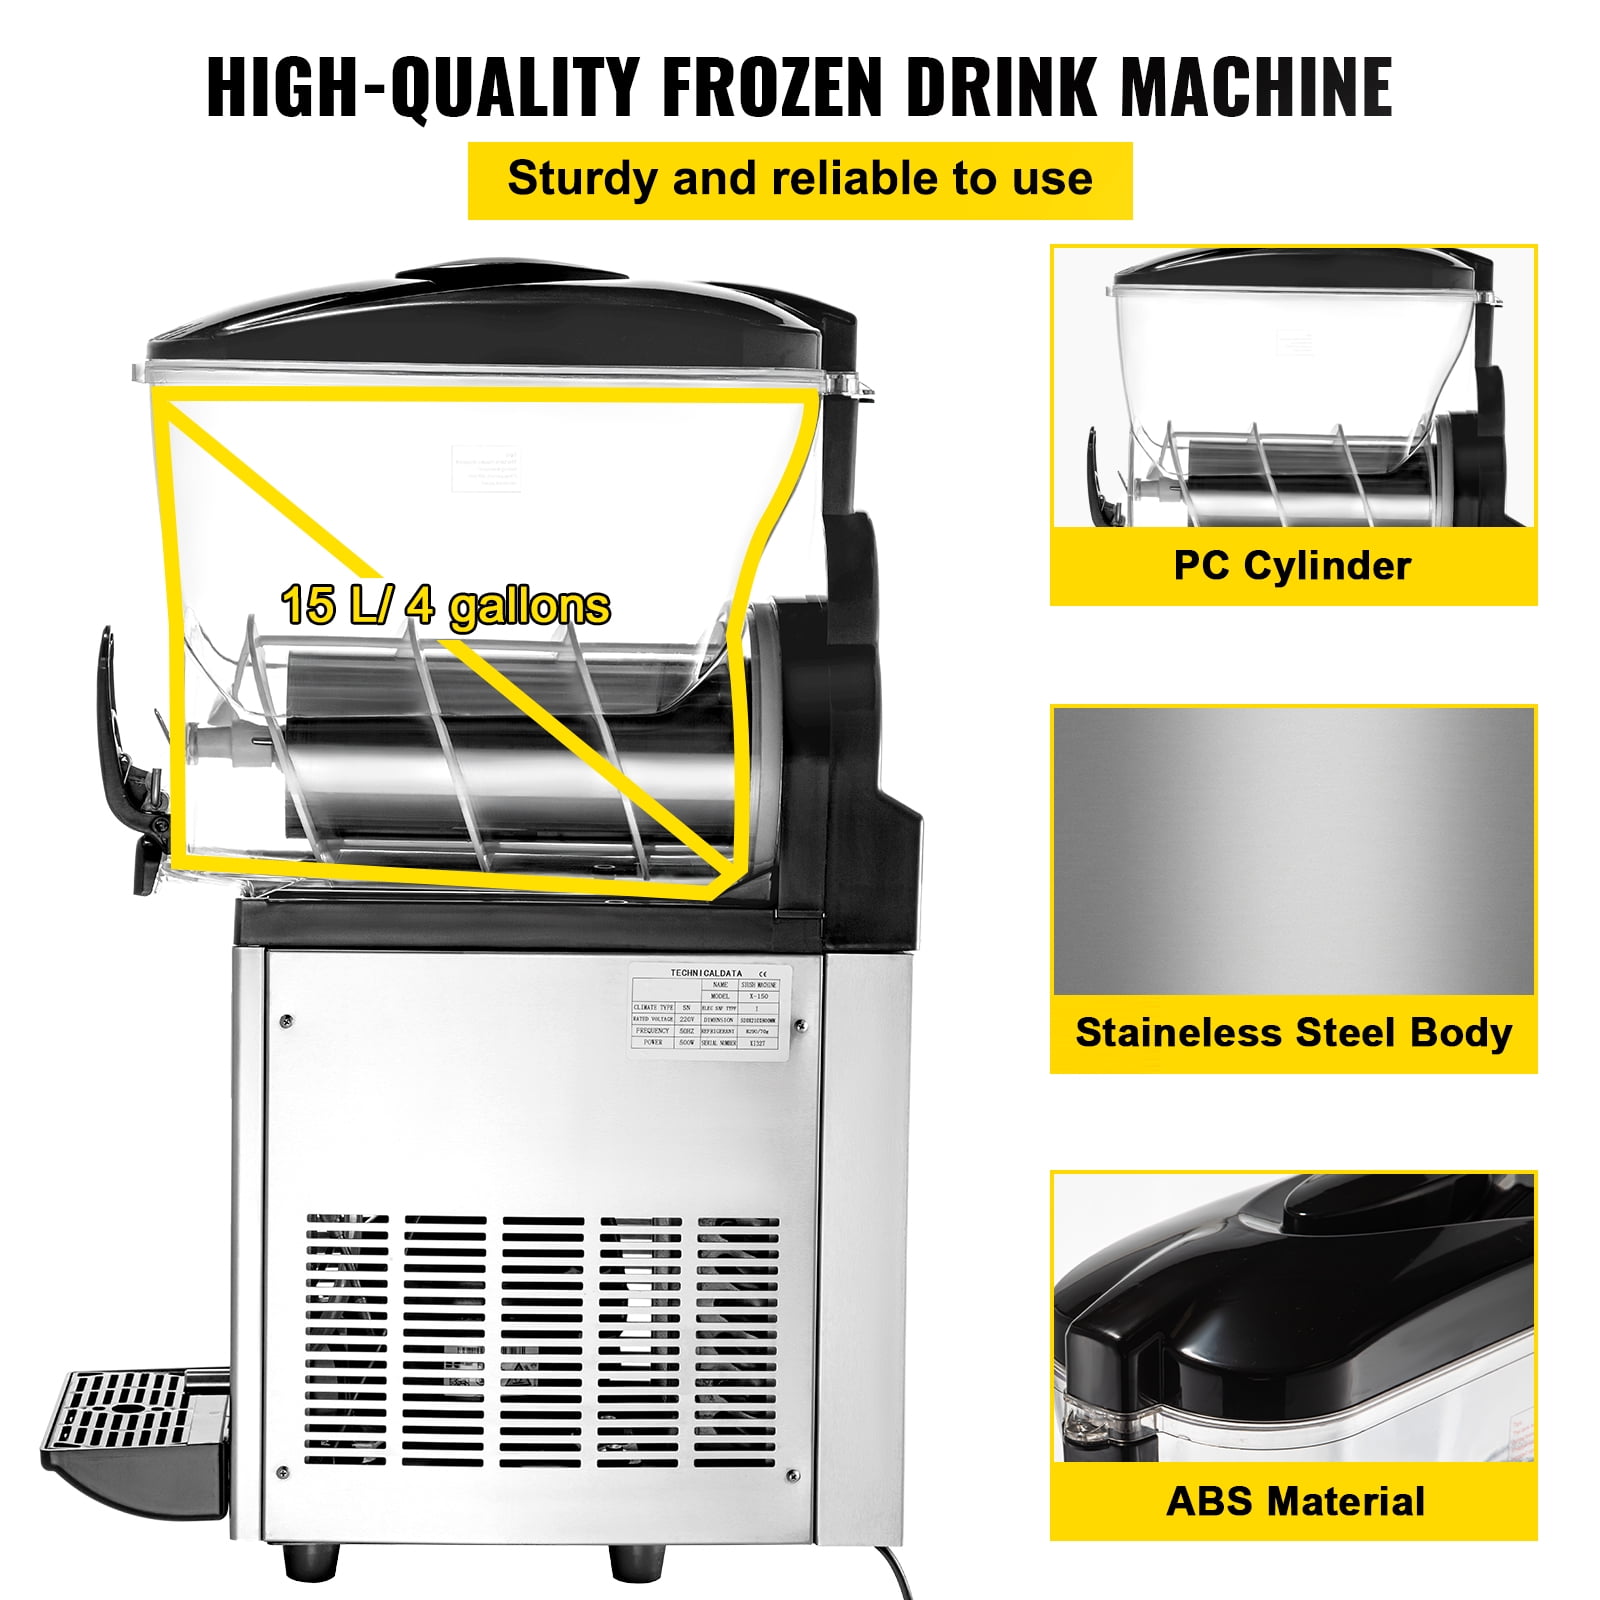 High Performance Digital Vacuum Blender, 🍹Summer is here which means it's  the season for frozen beverages! Make healthy smoothies, frozen lattes,  margaritas, and so much more with the Moxie high